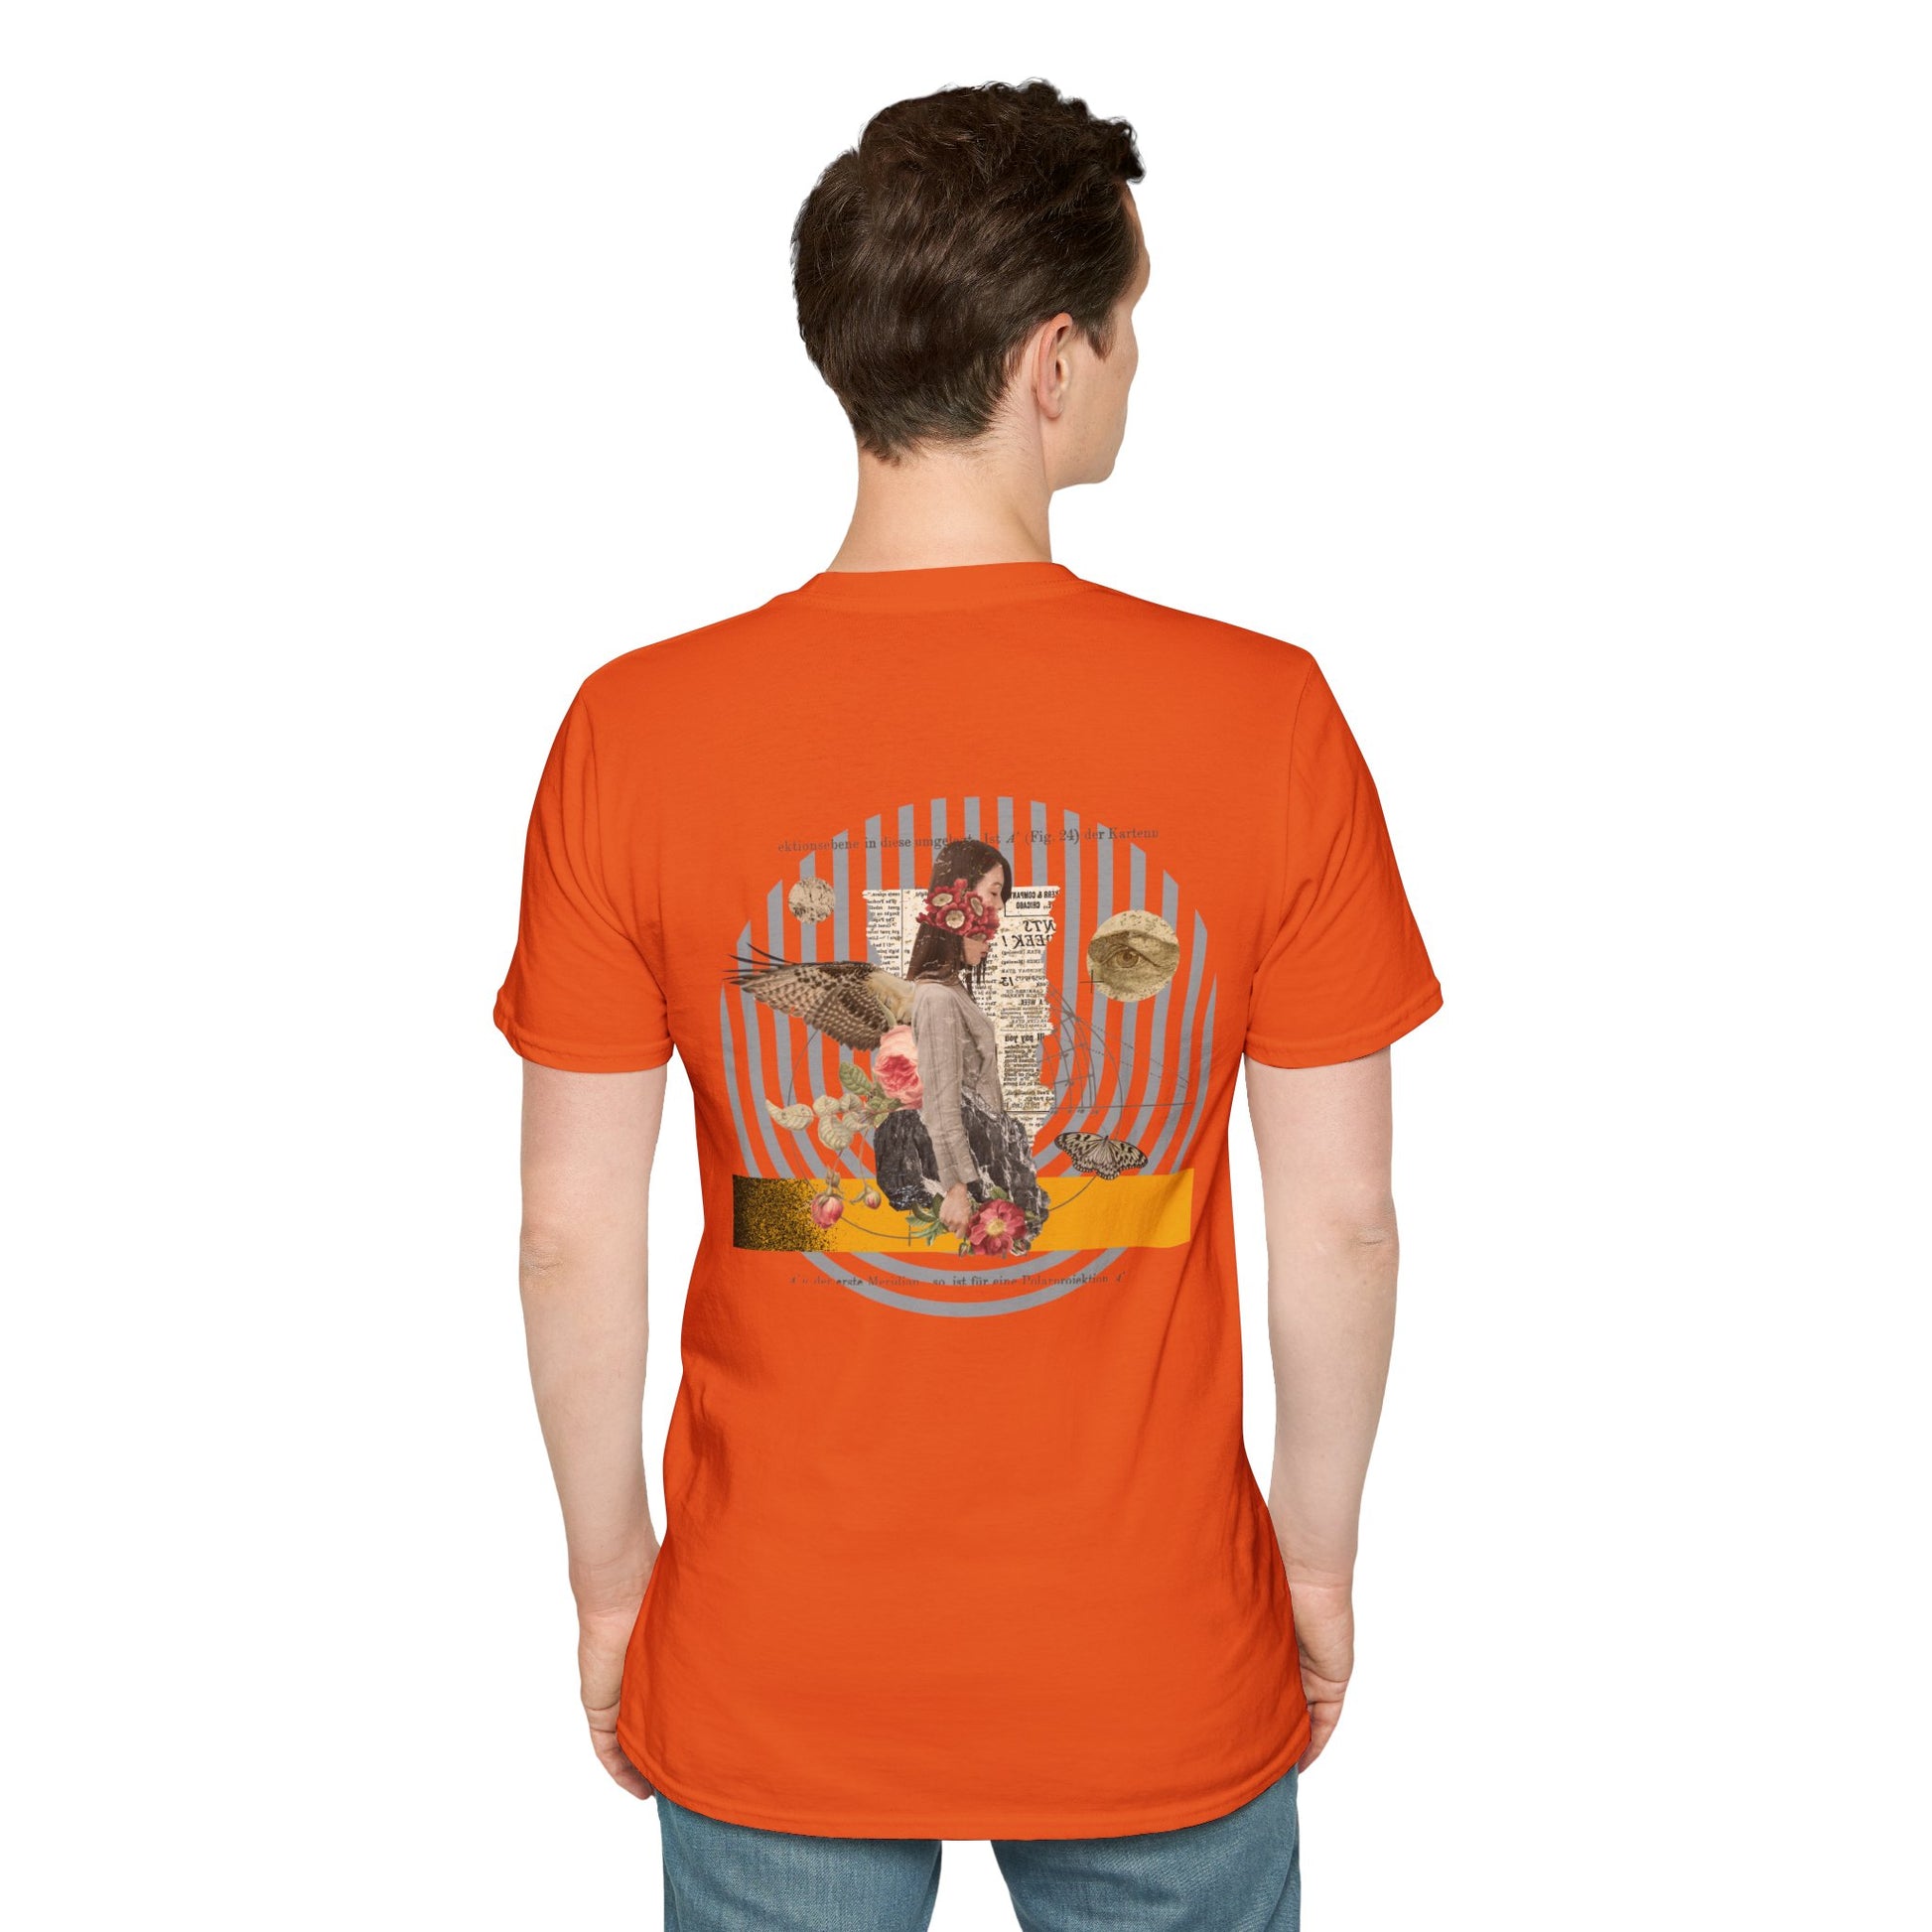 Orange T-shirt with a mysterious figure surrounded by butterflies and roses, with newspaper clippings and black stripes